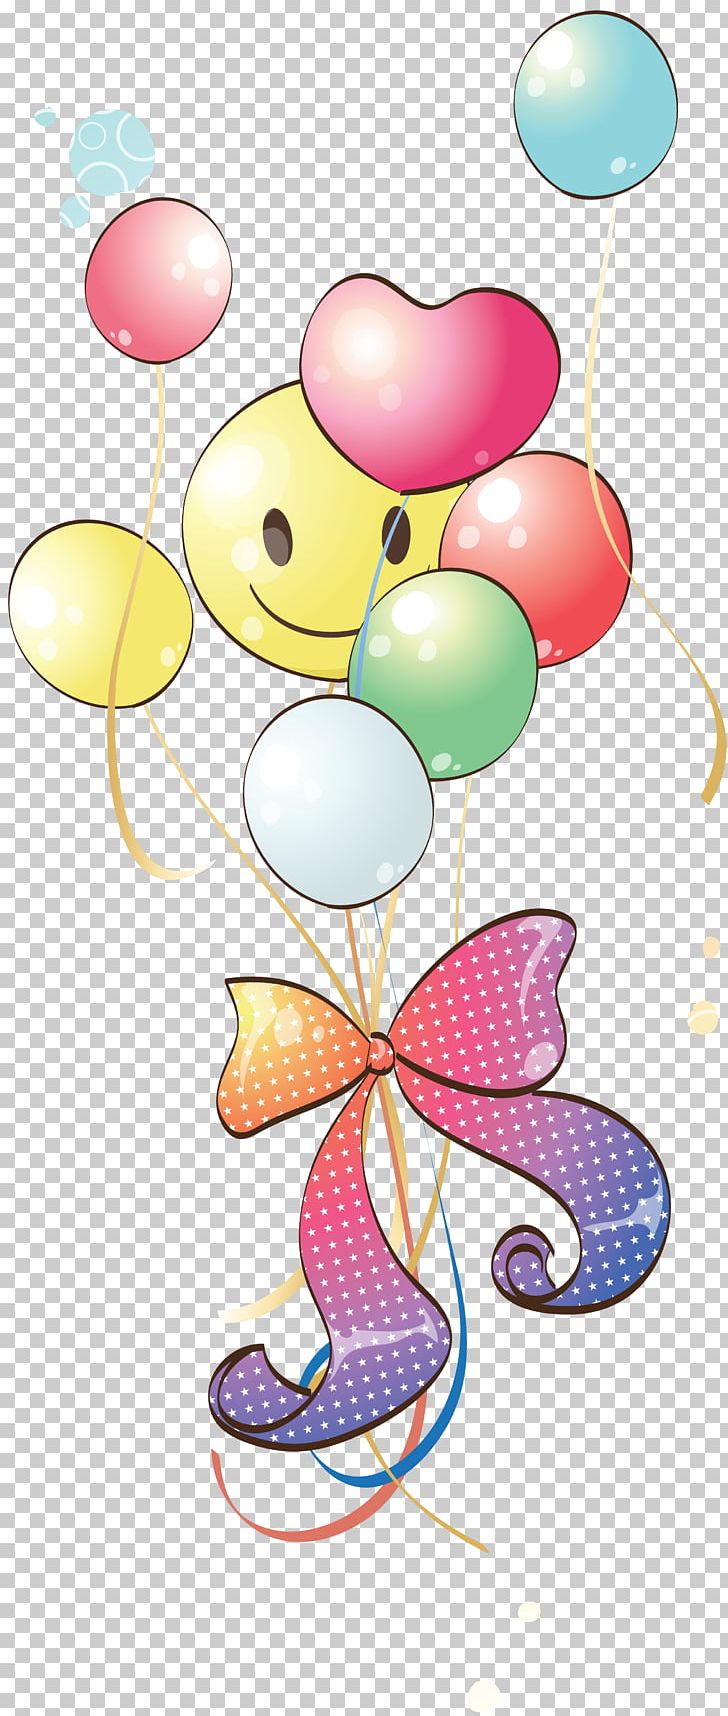 Toy Balloon PNG, Clipart, Art, Artwork, Balloon, Birthday, Fictional Character Free PNG Download